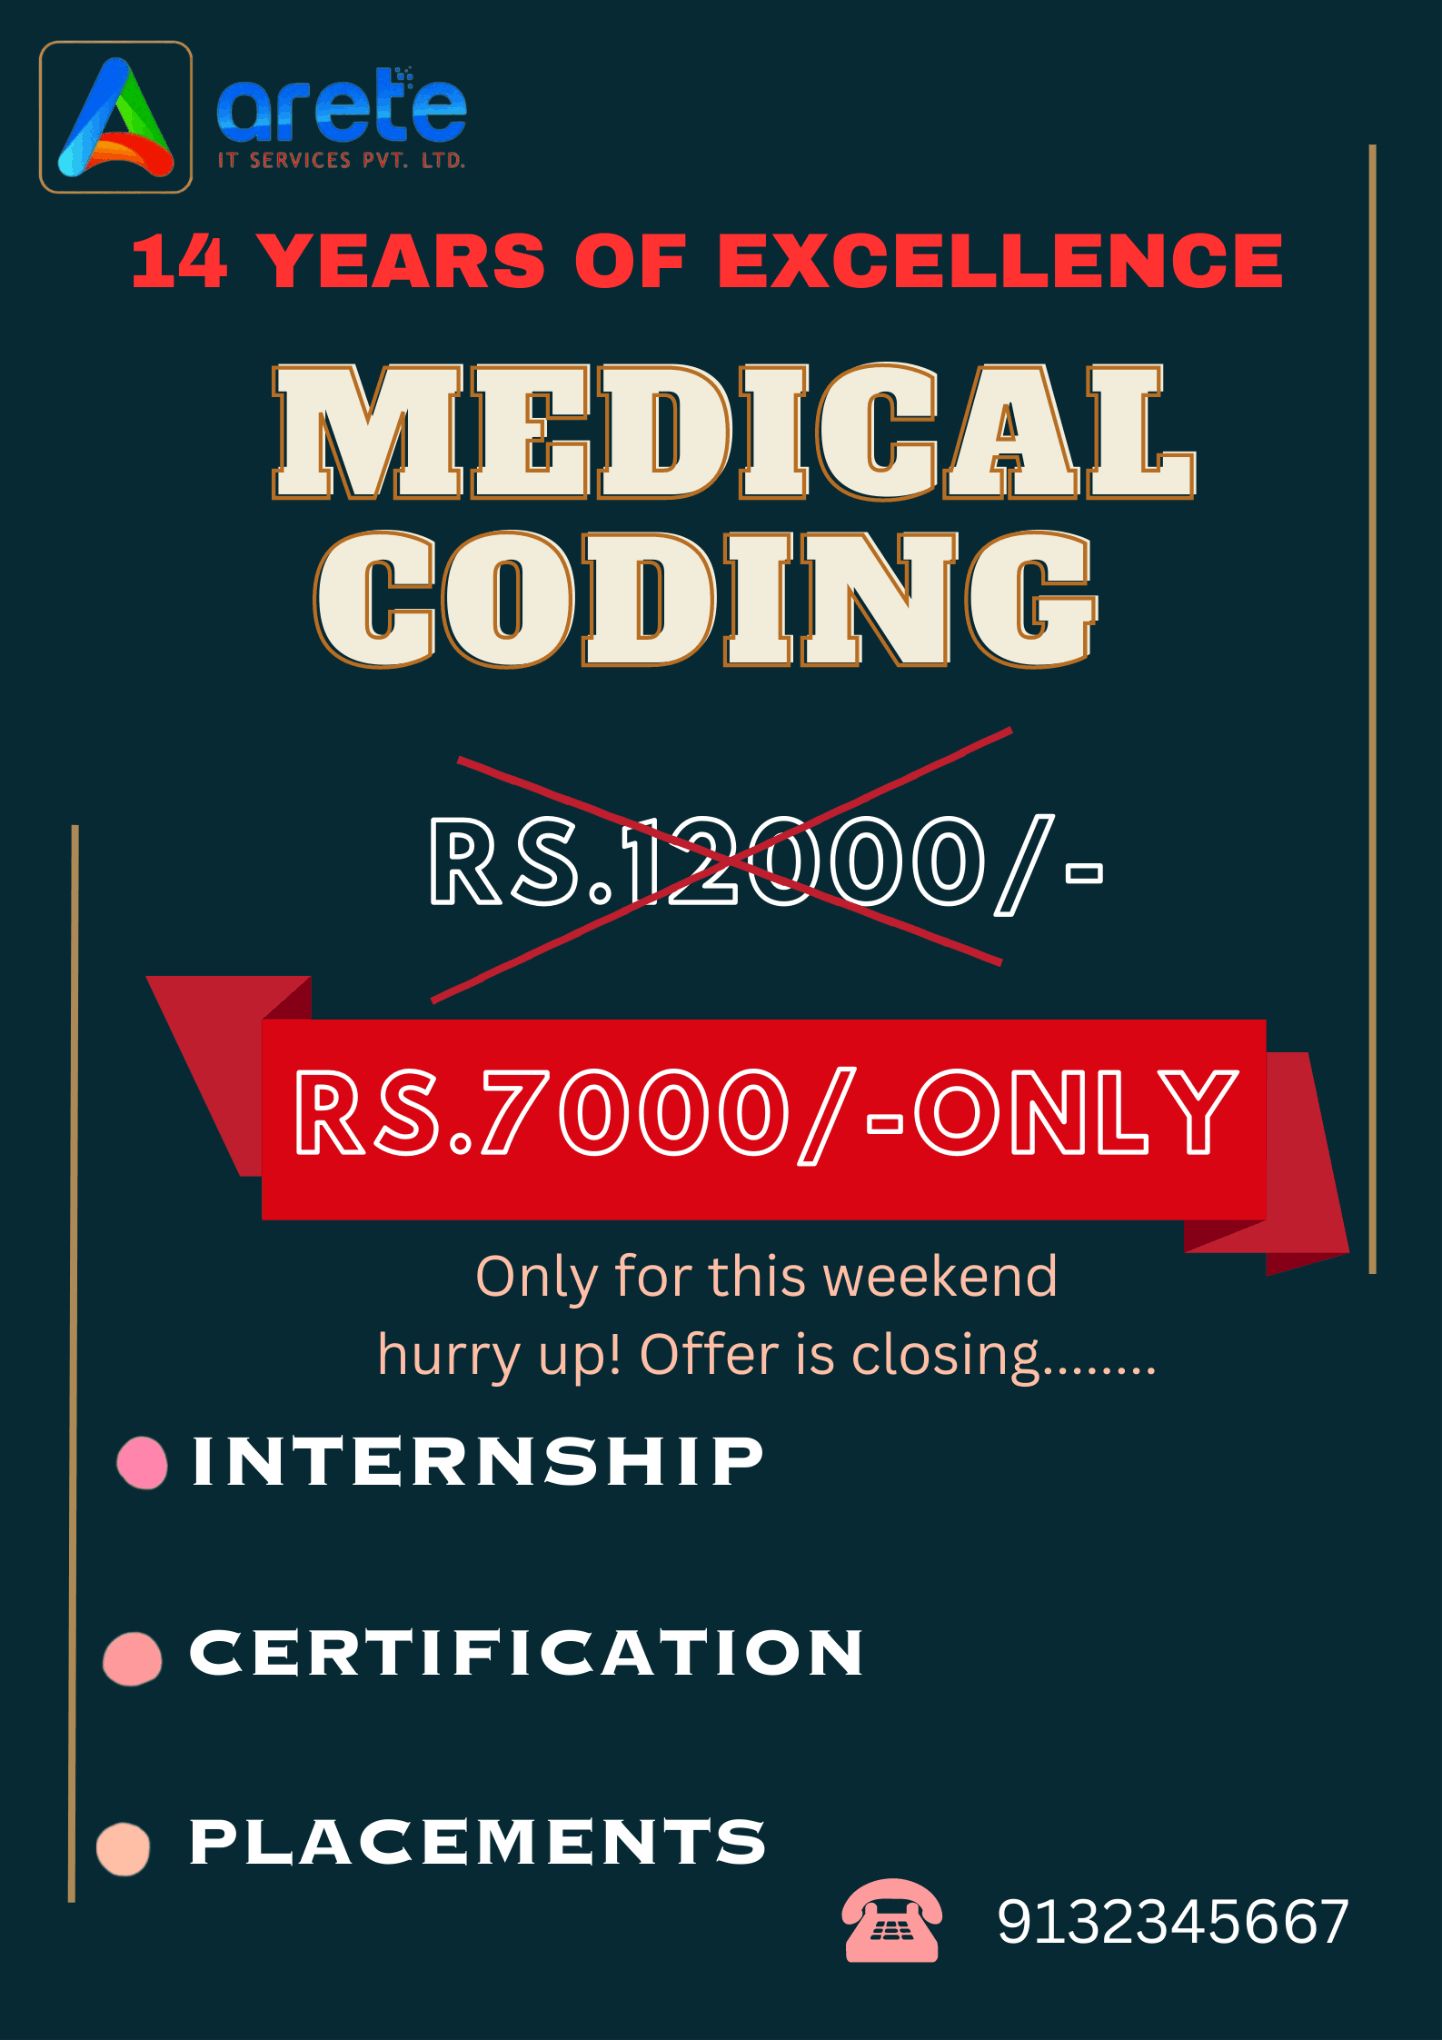 Medical coding coaching with placements 